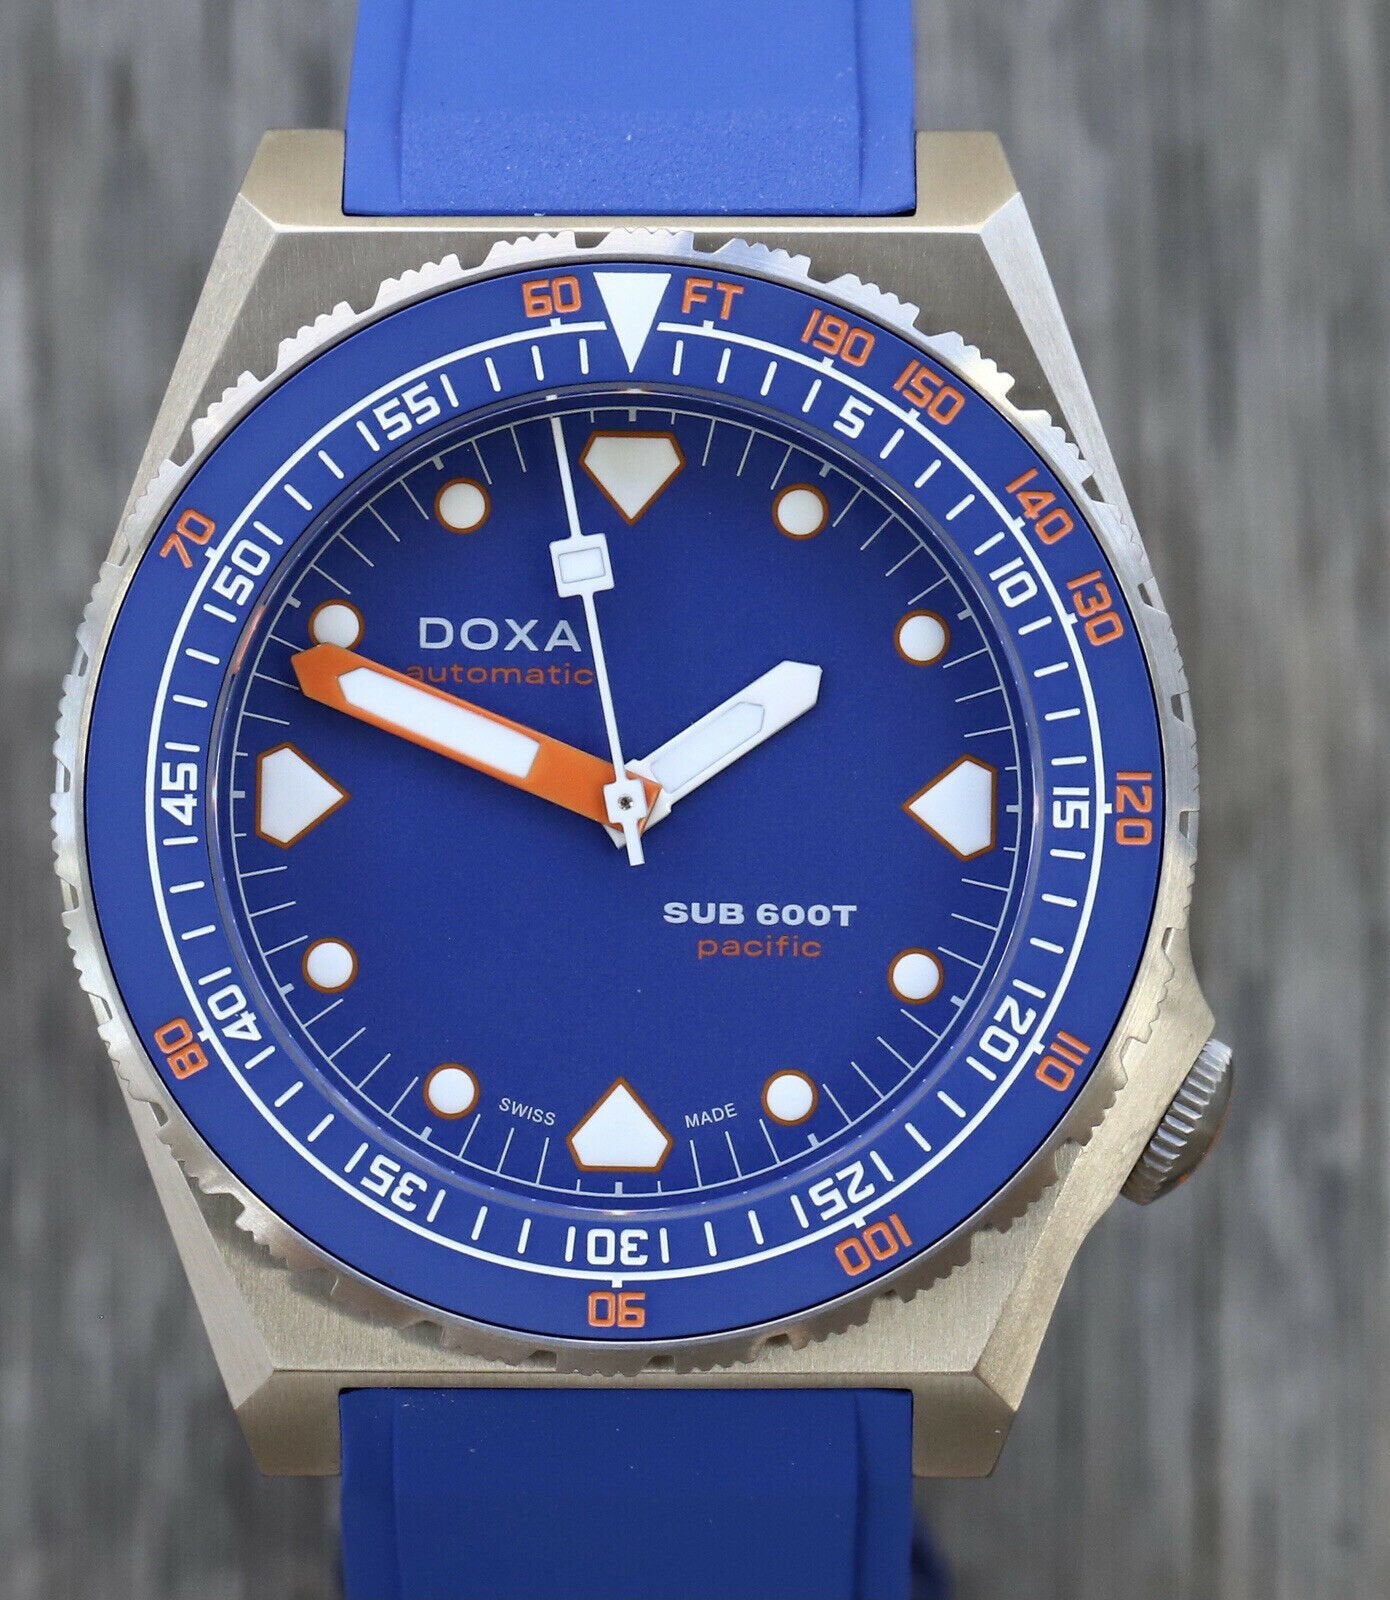 Time_26_Tide_x_Doxa_SUB_600T_E2_80_98pacific_E2_80_99_Limited_Edition_E2_80_93_Brand_New_Watch_Vault_01.jpg